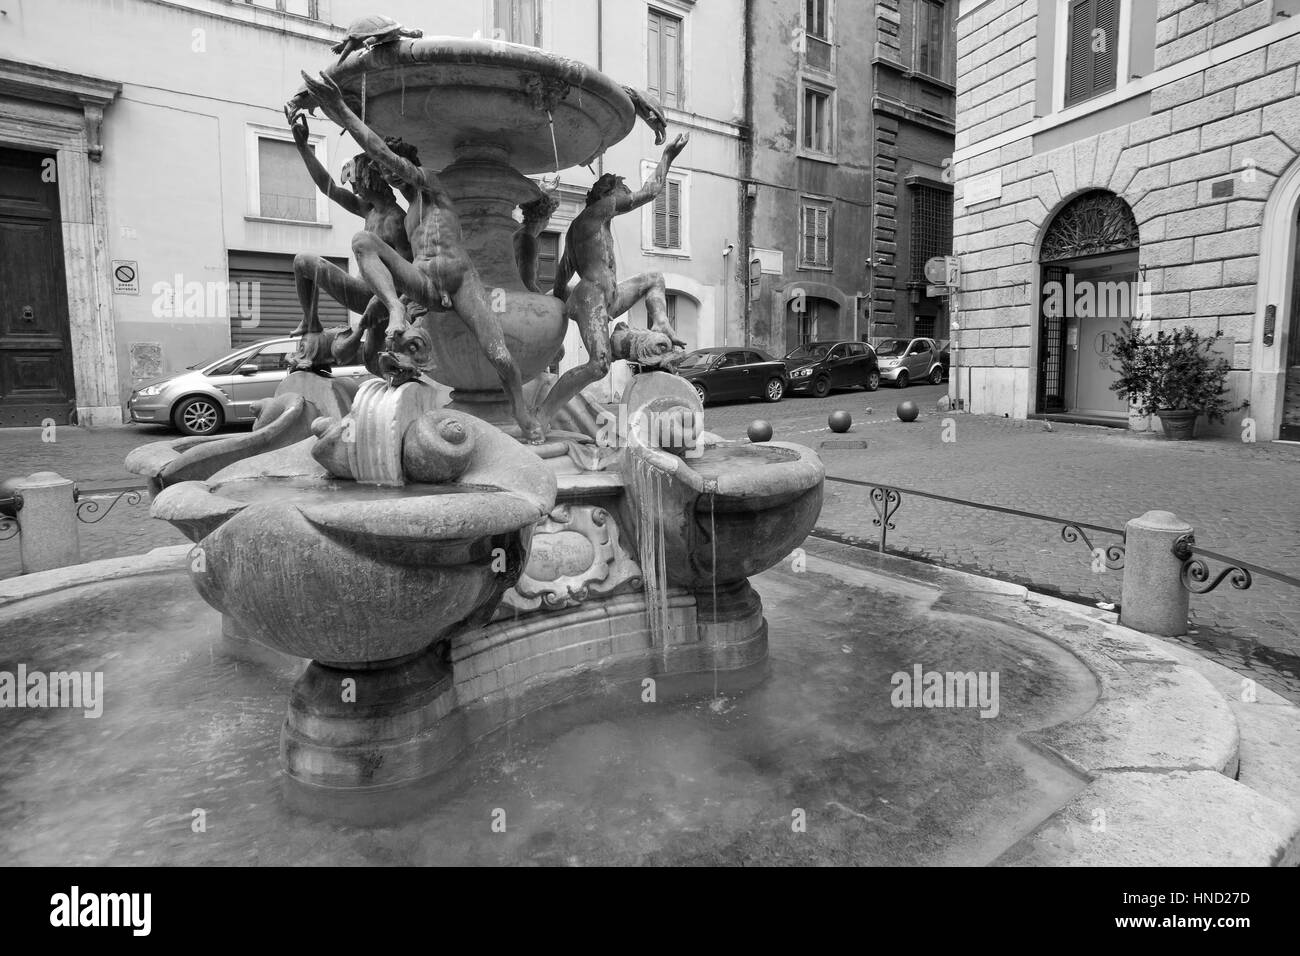 Rome, Italy - January 8, 2017: view of Fontana delle Tartarughe with icicle in Rome, piazza Mattei Stock Photo